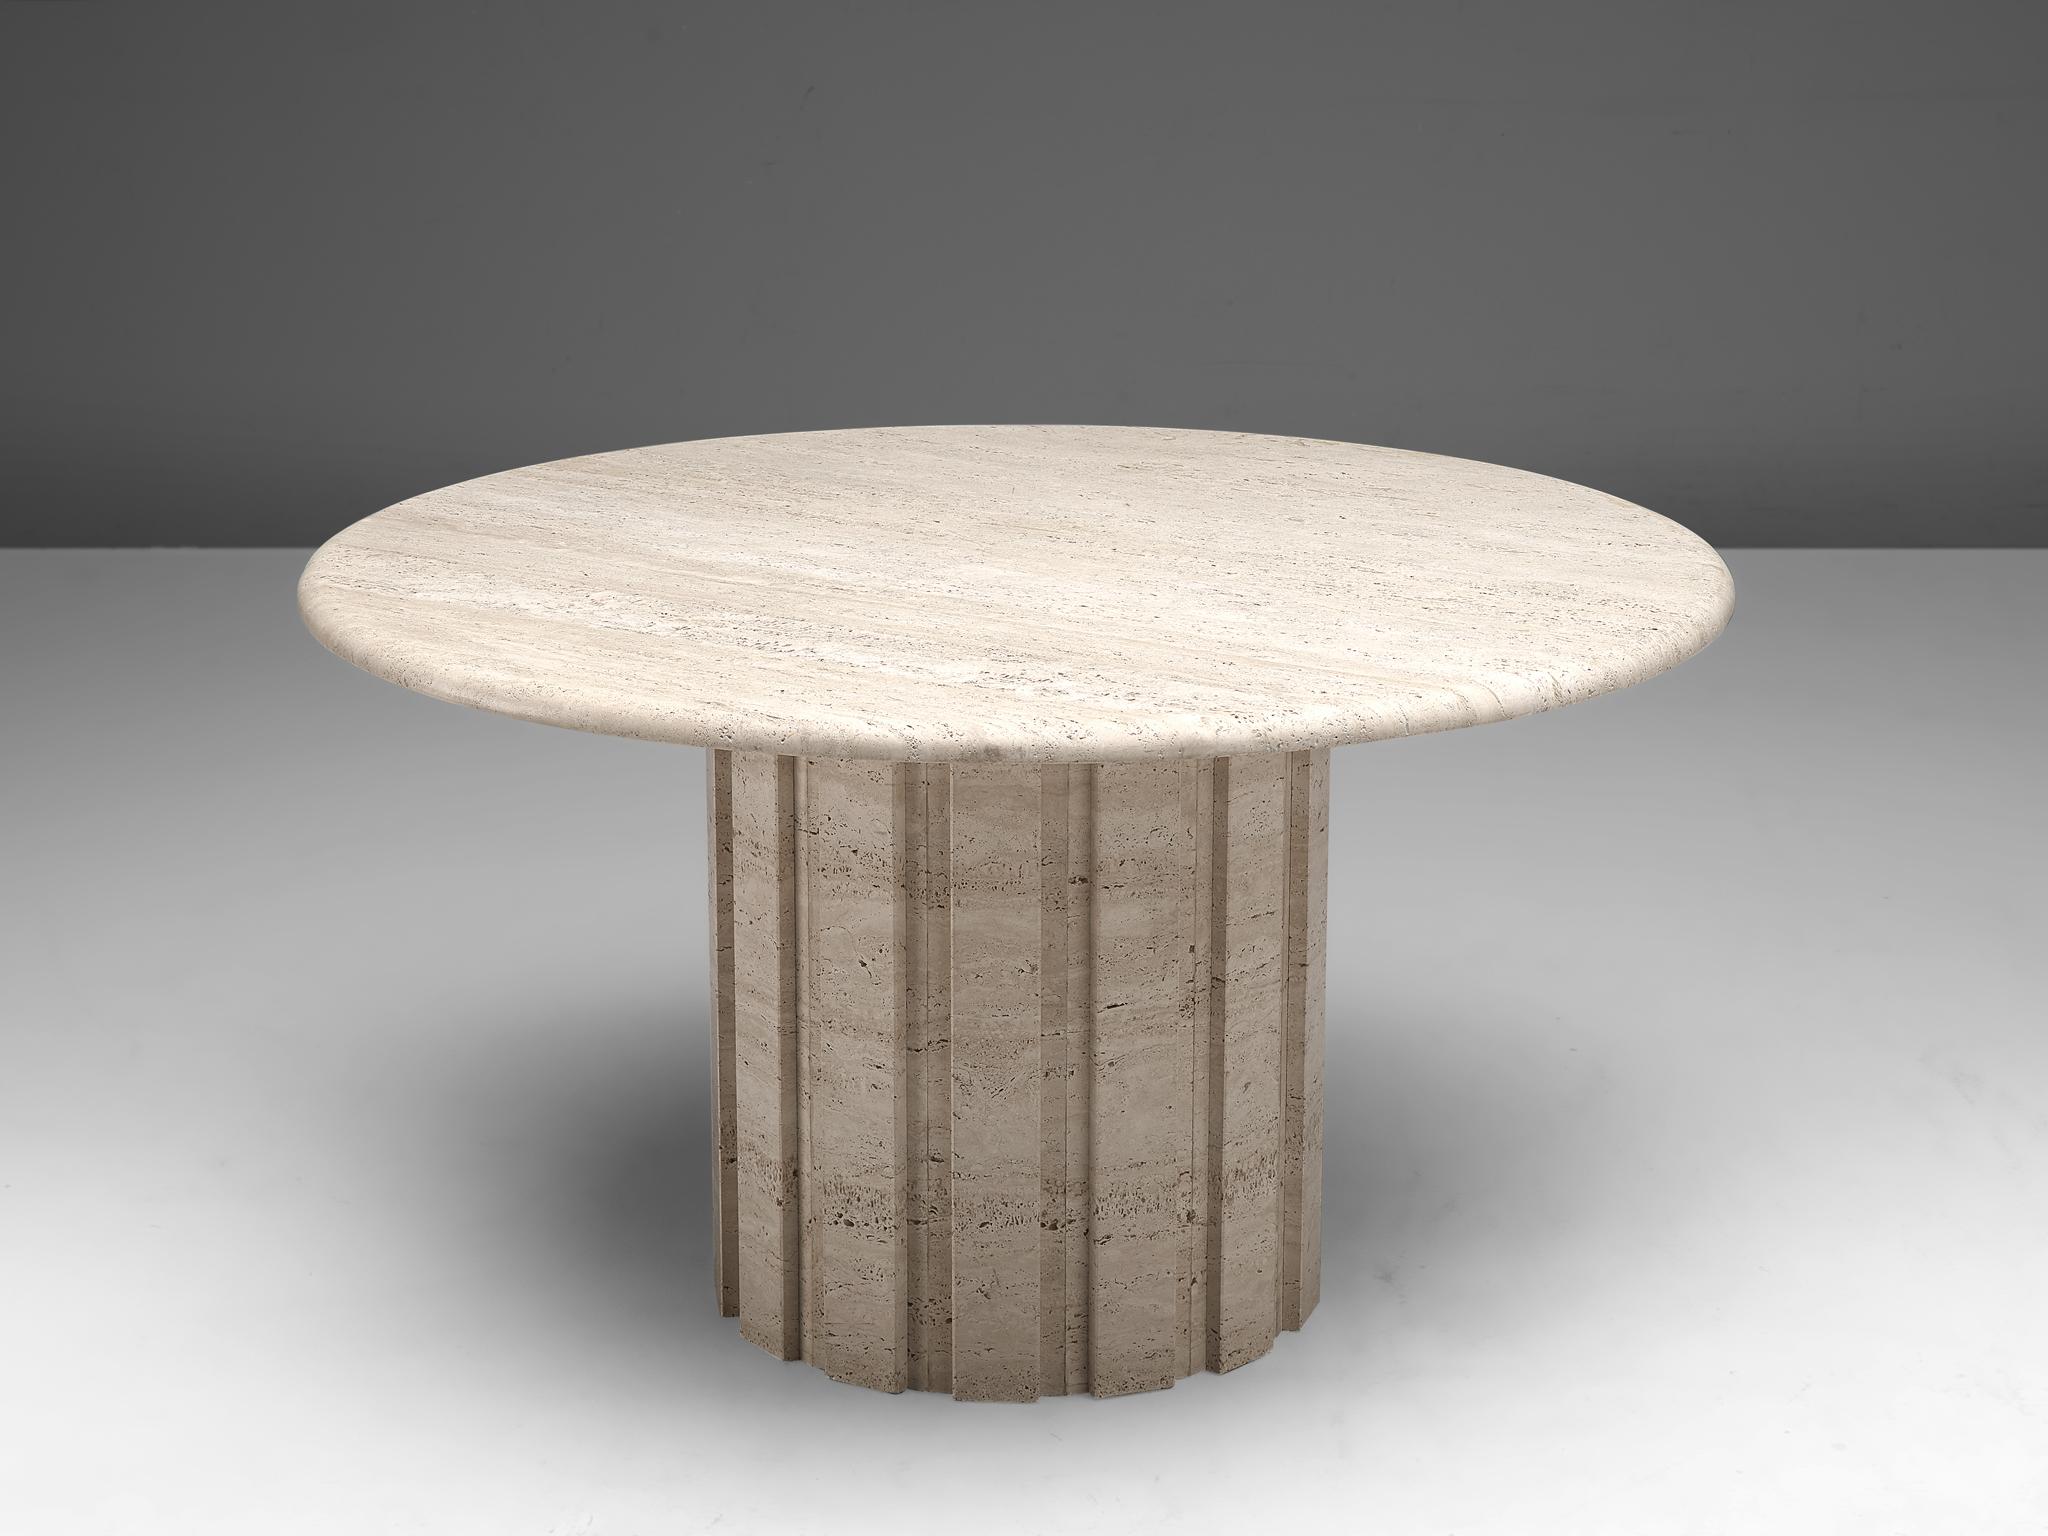 Round dining table, travertine, Germany, 1970s

This archetypical center table is a skillful example of postmodern design. The table is executed in travertine. The round table features no joints or clamps and is architectural in its structure. The